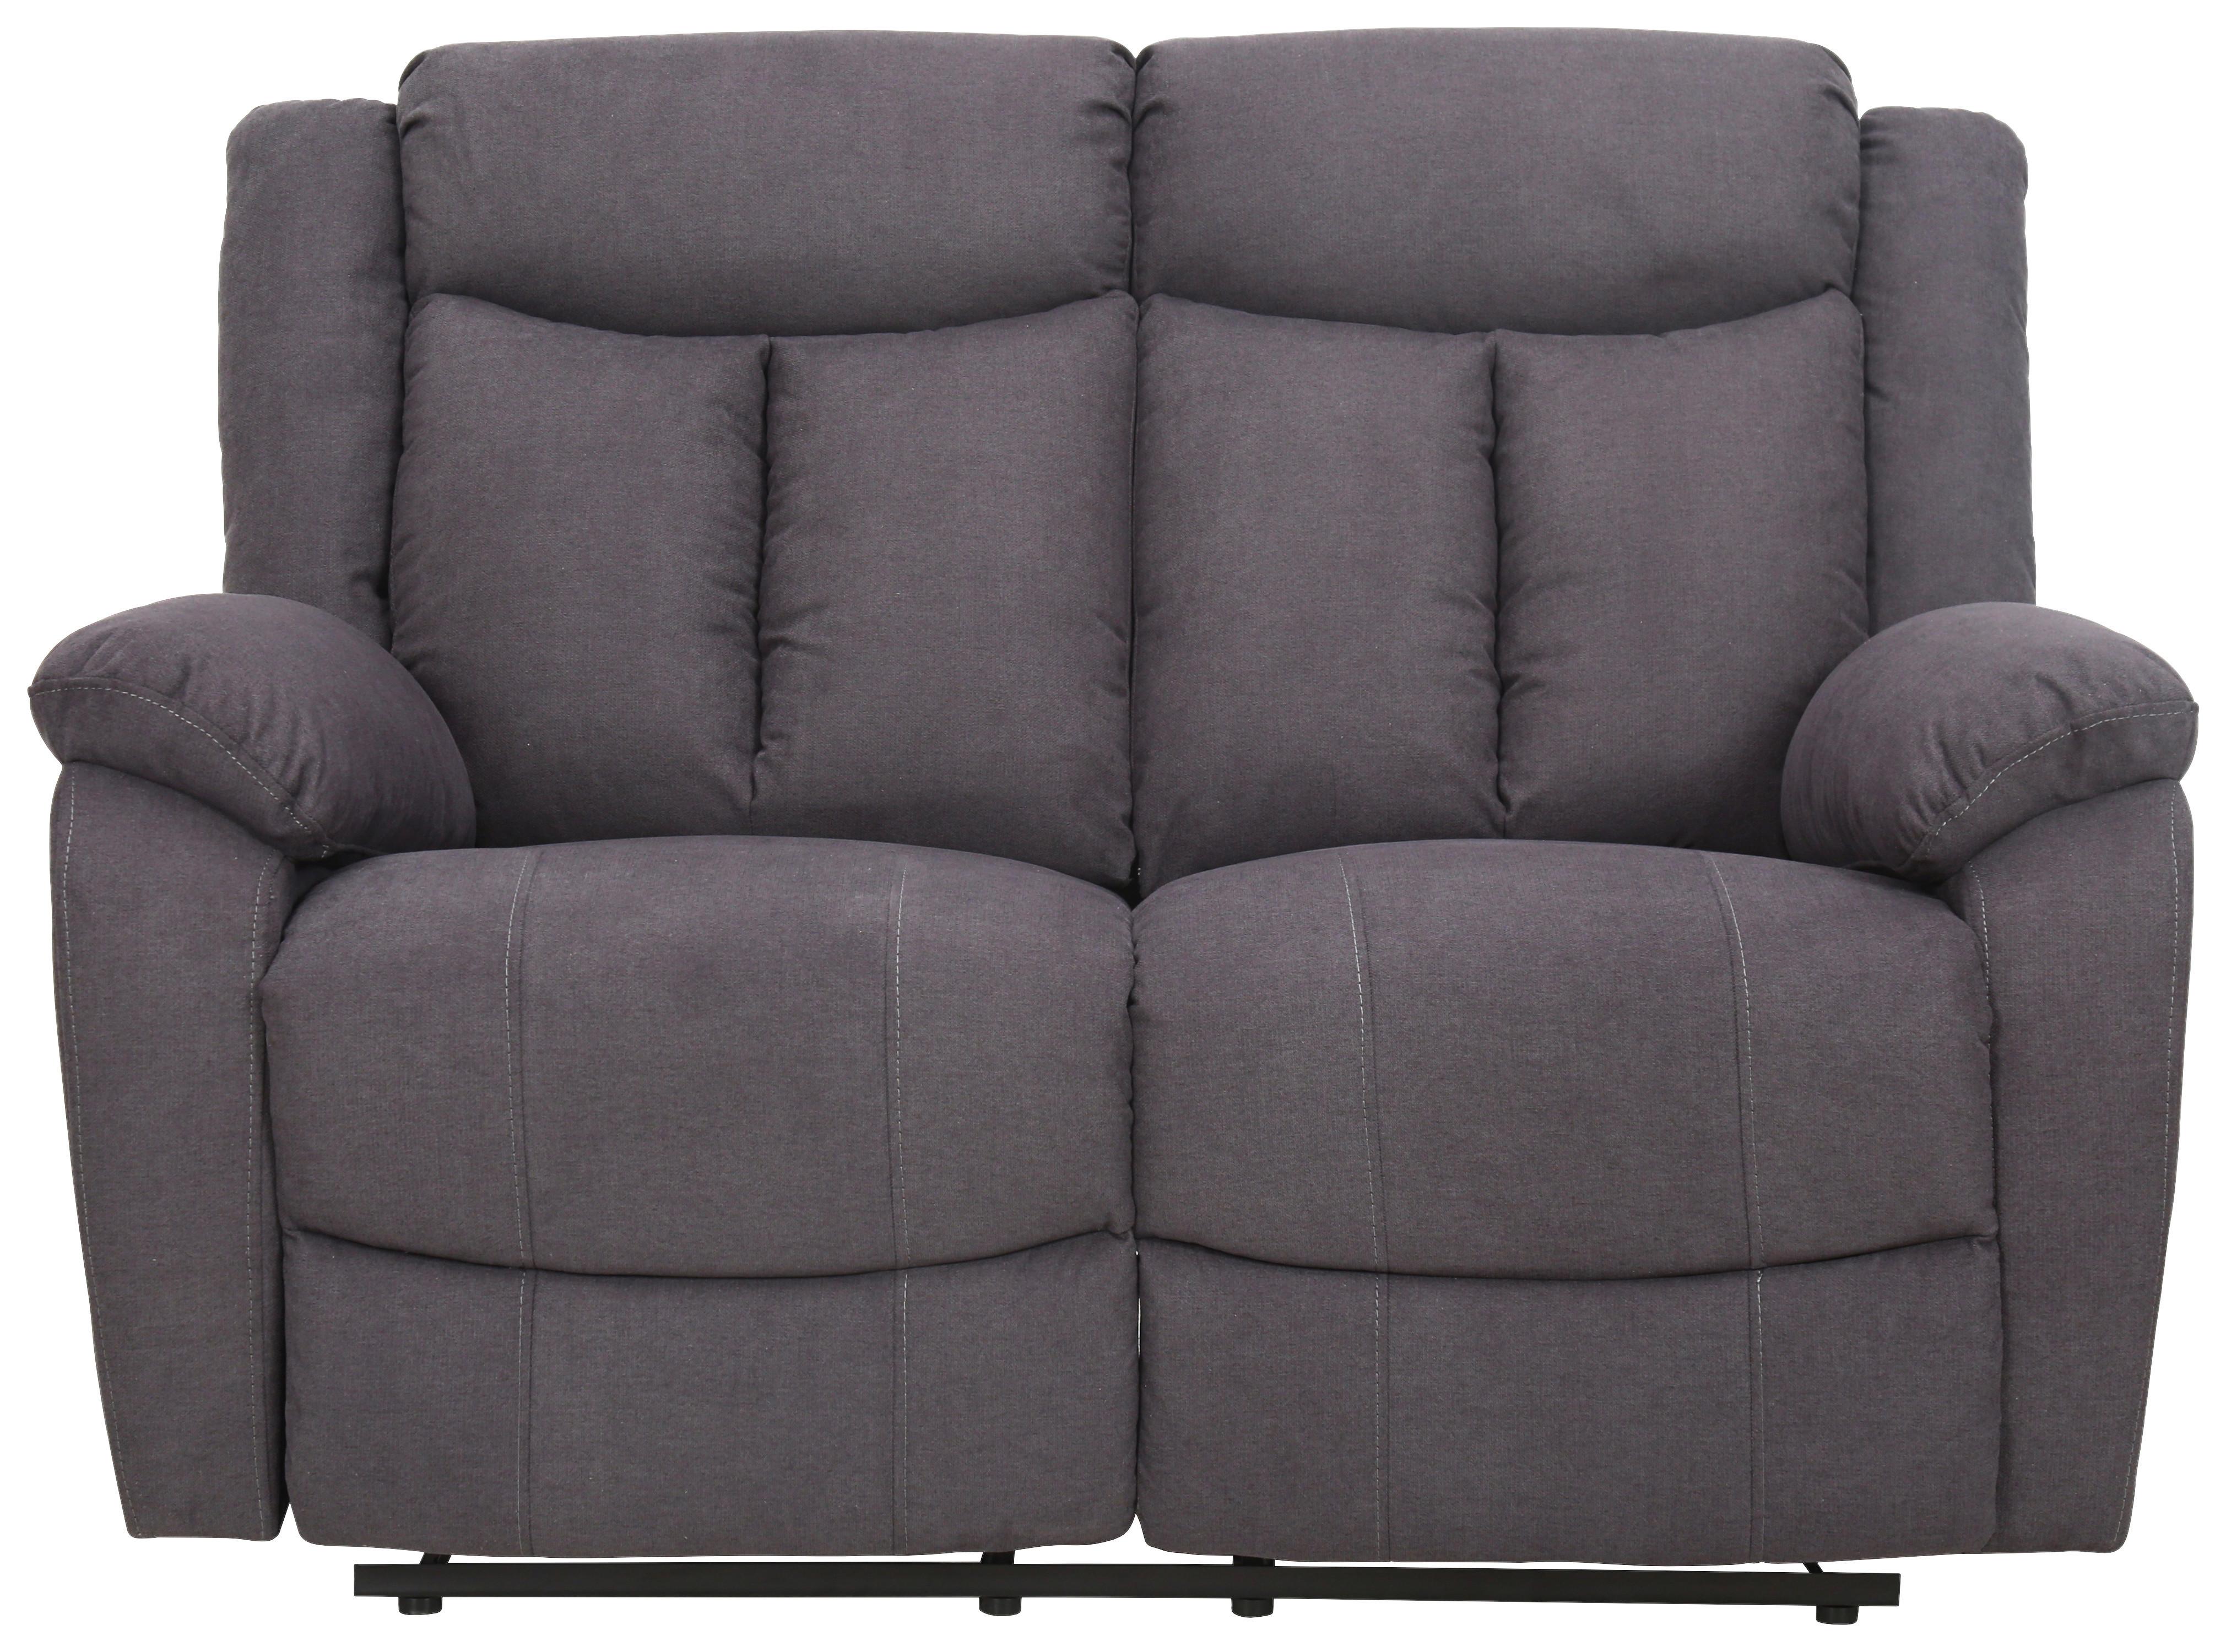 Sofa mit Relaxfunktion in Grau